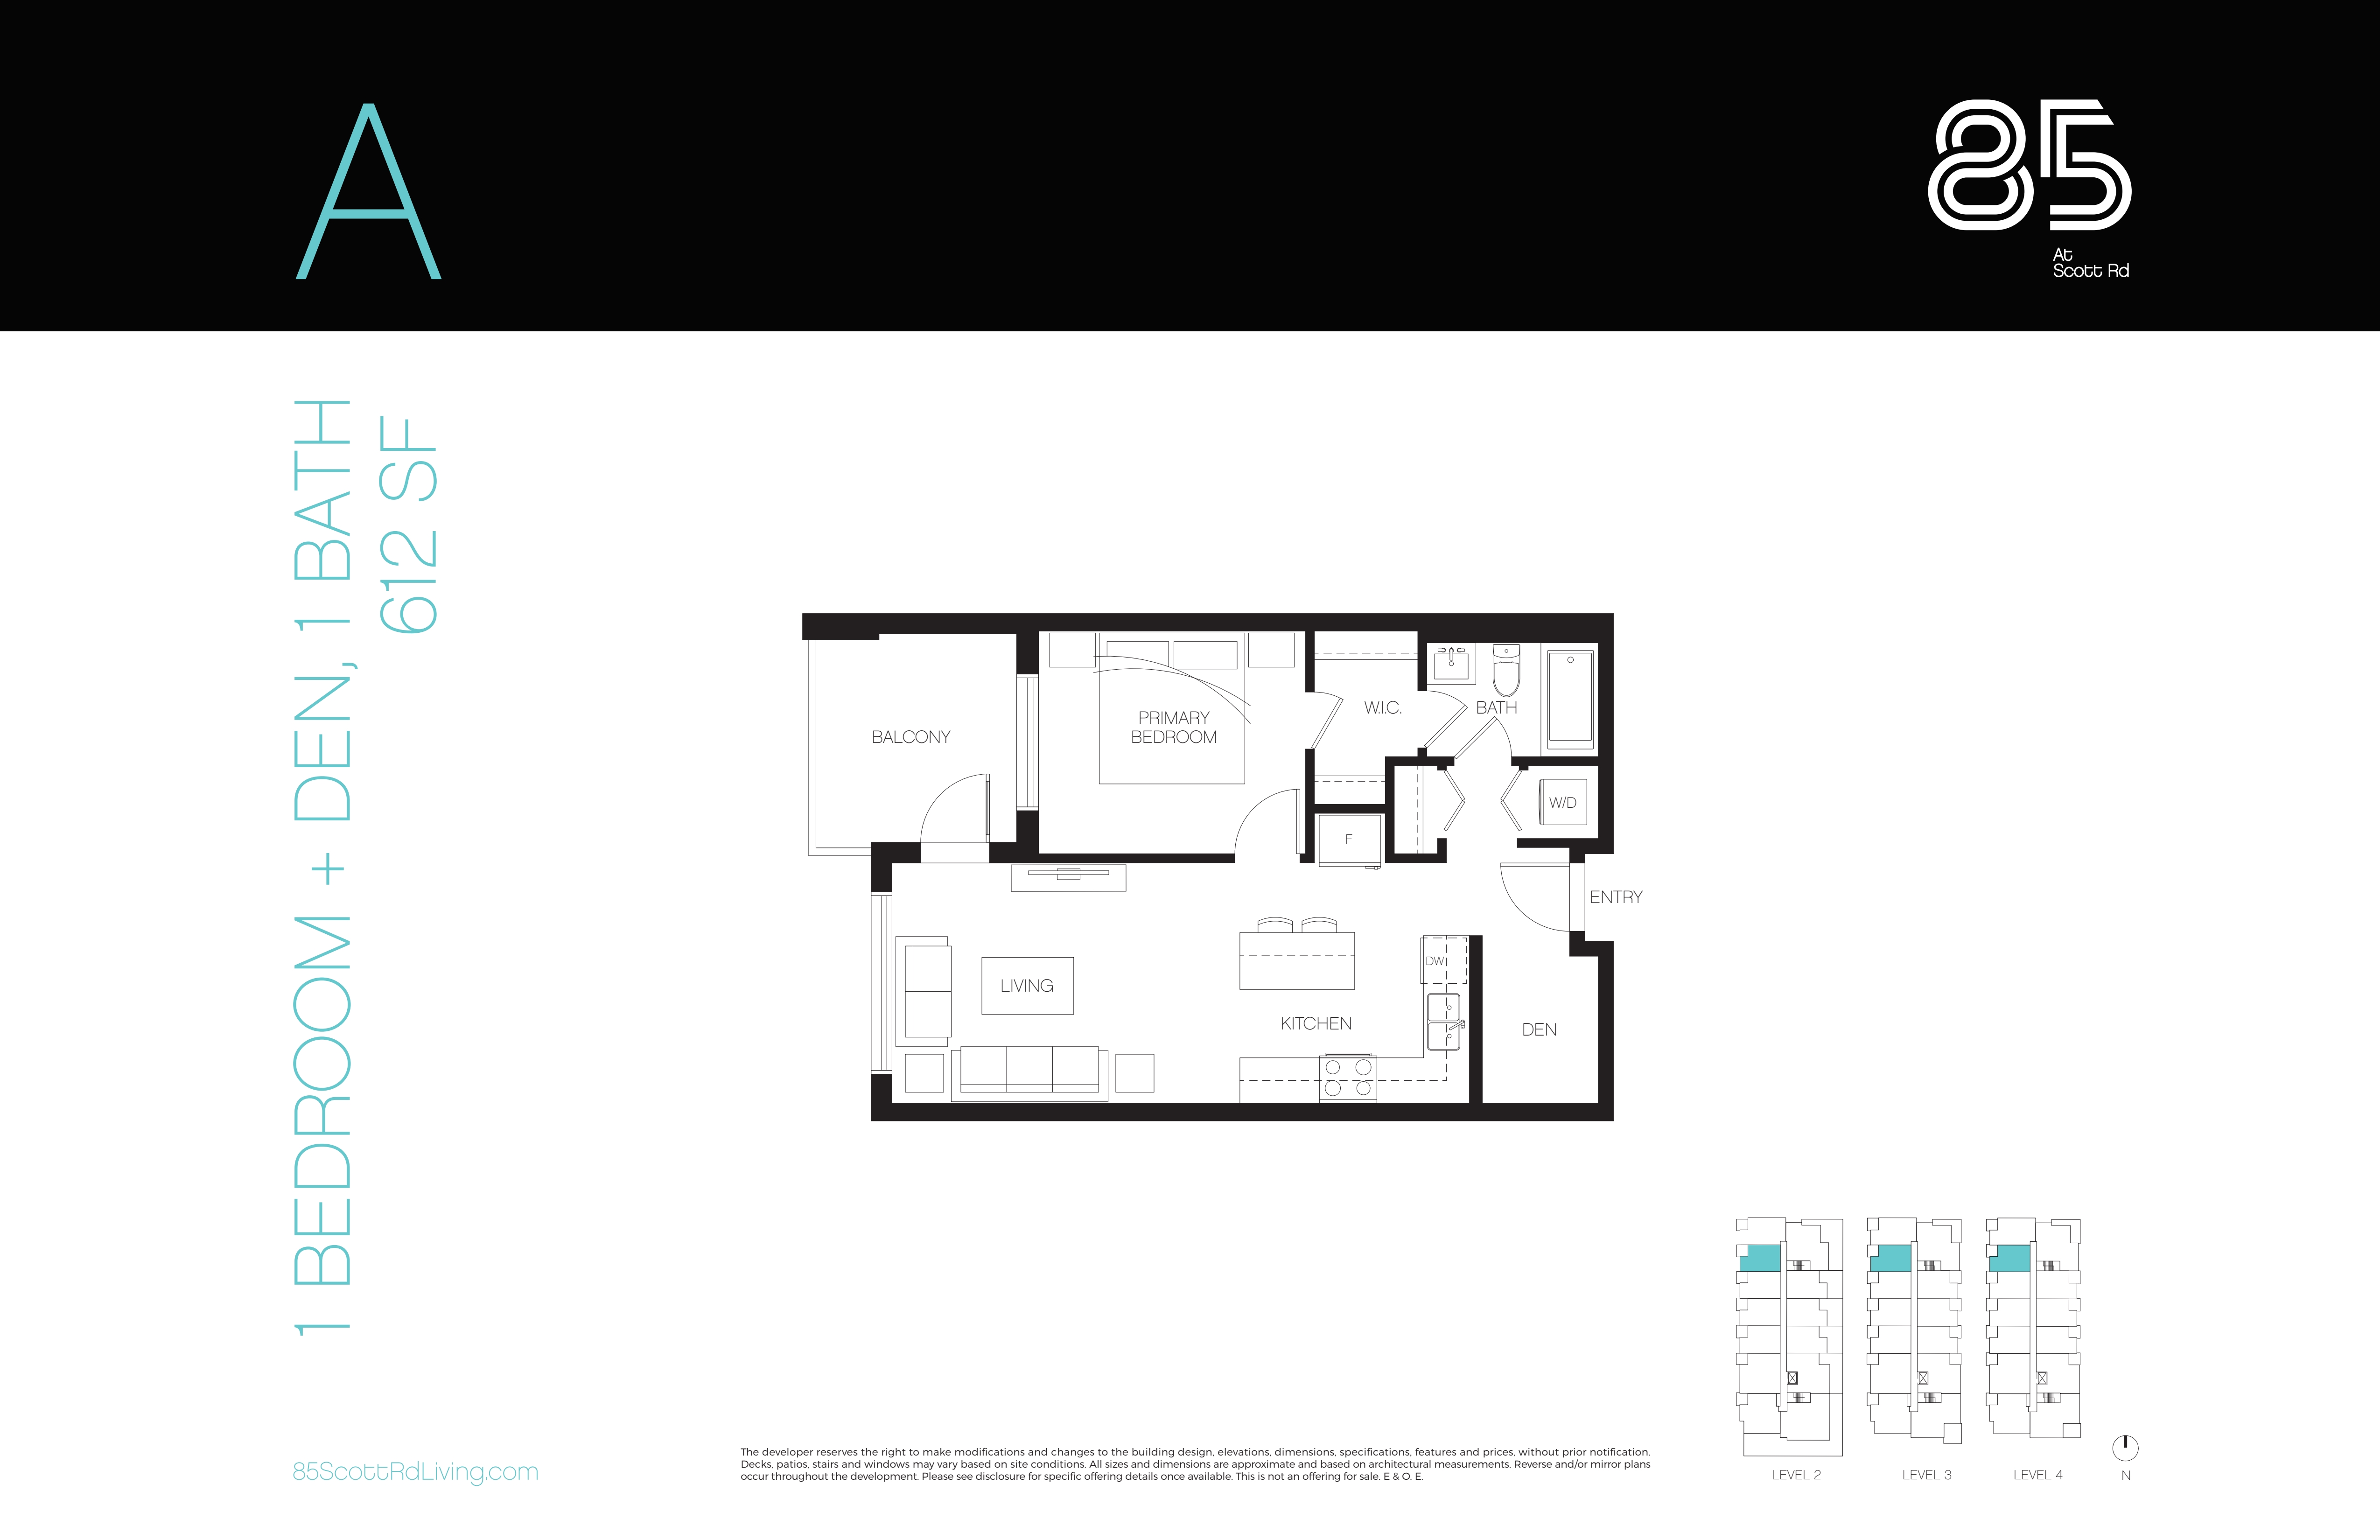 A Floor Plan of The 85 Condos with undefined beds